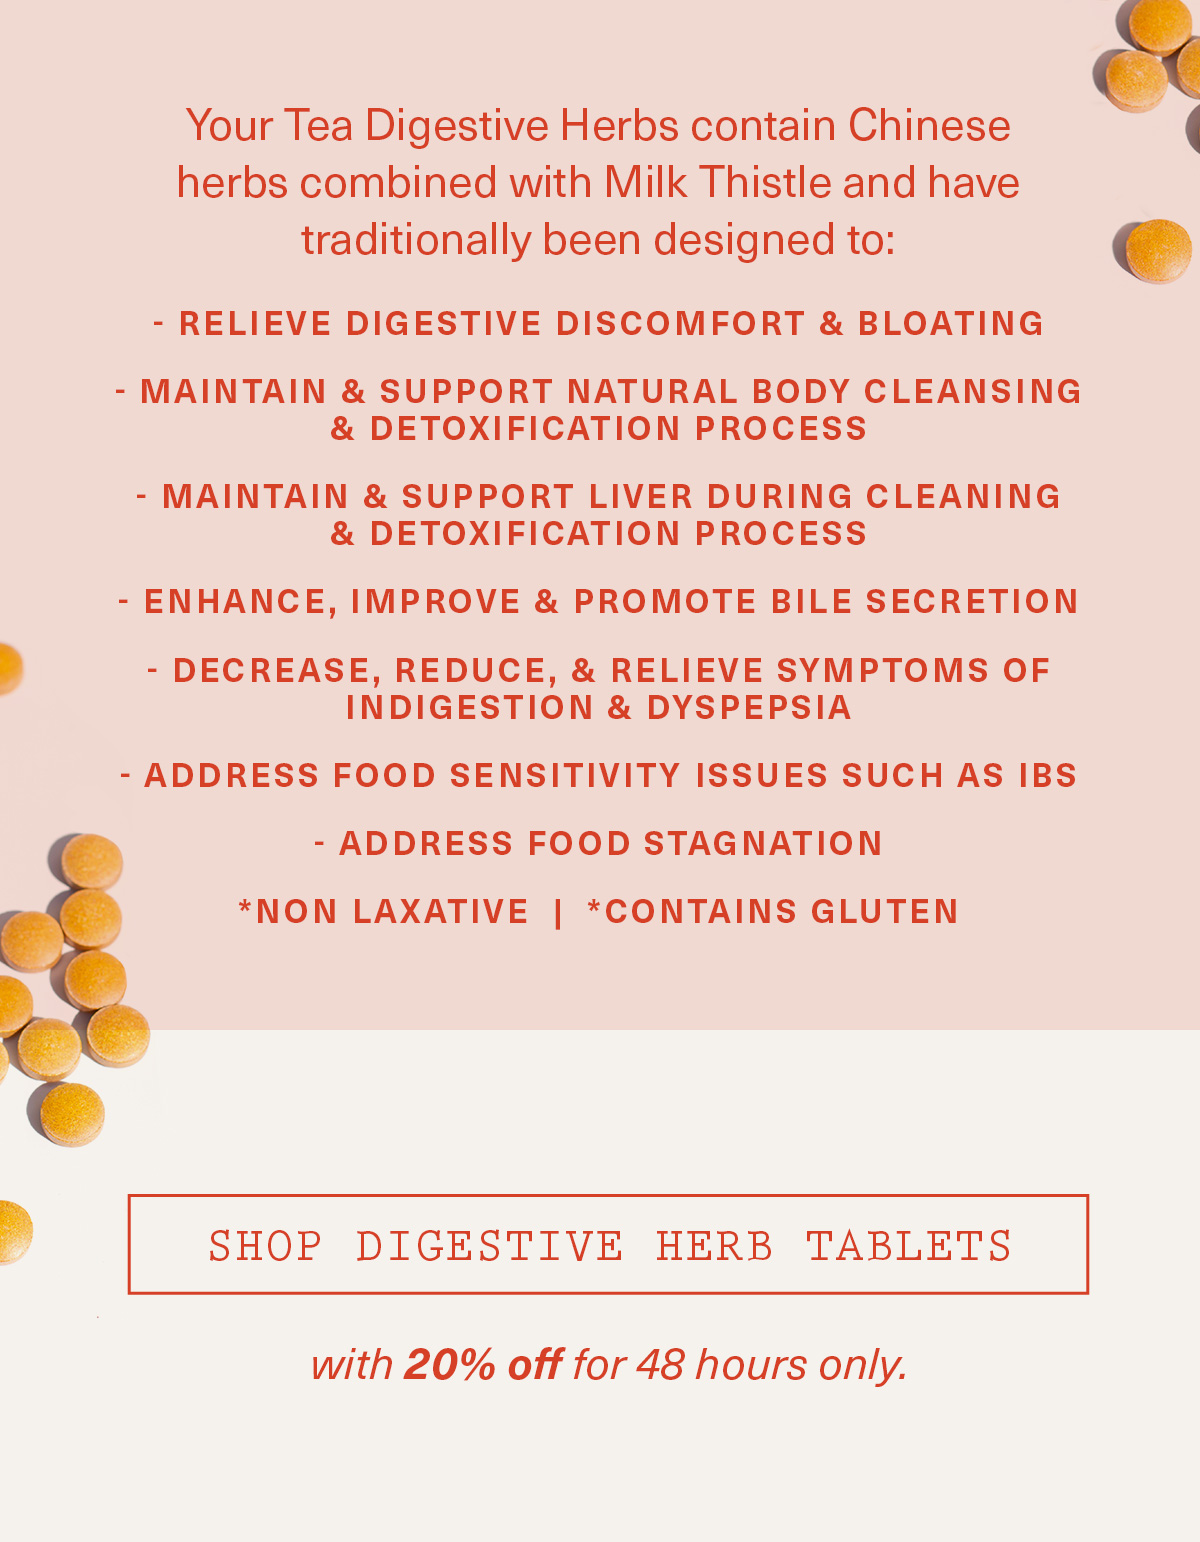 20% off Digestive Herb Tablets